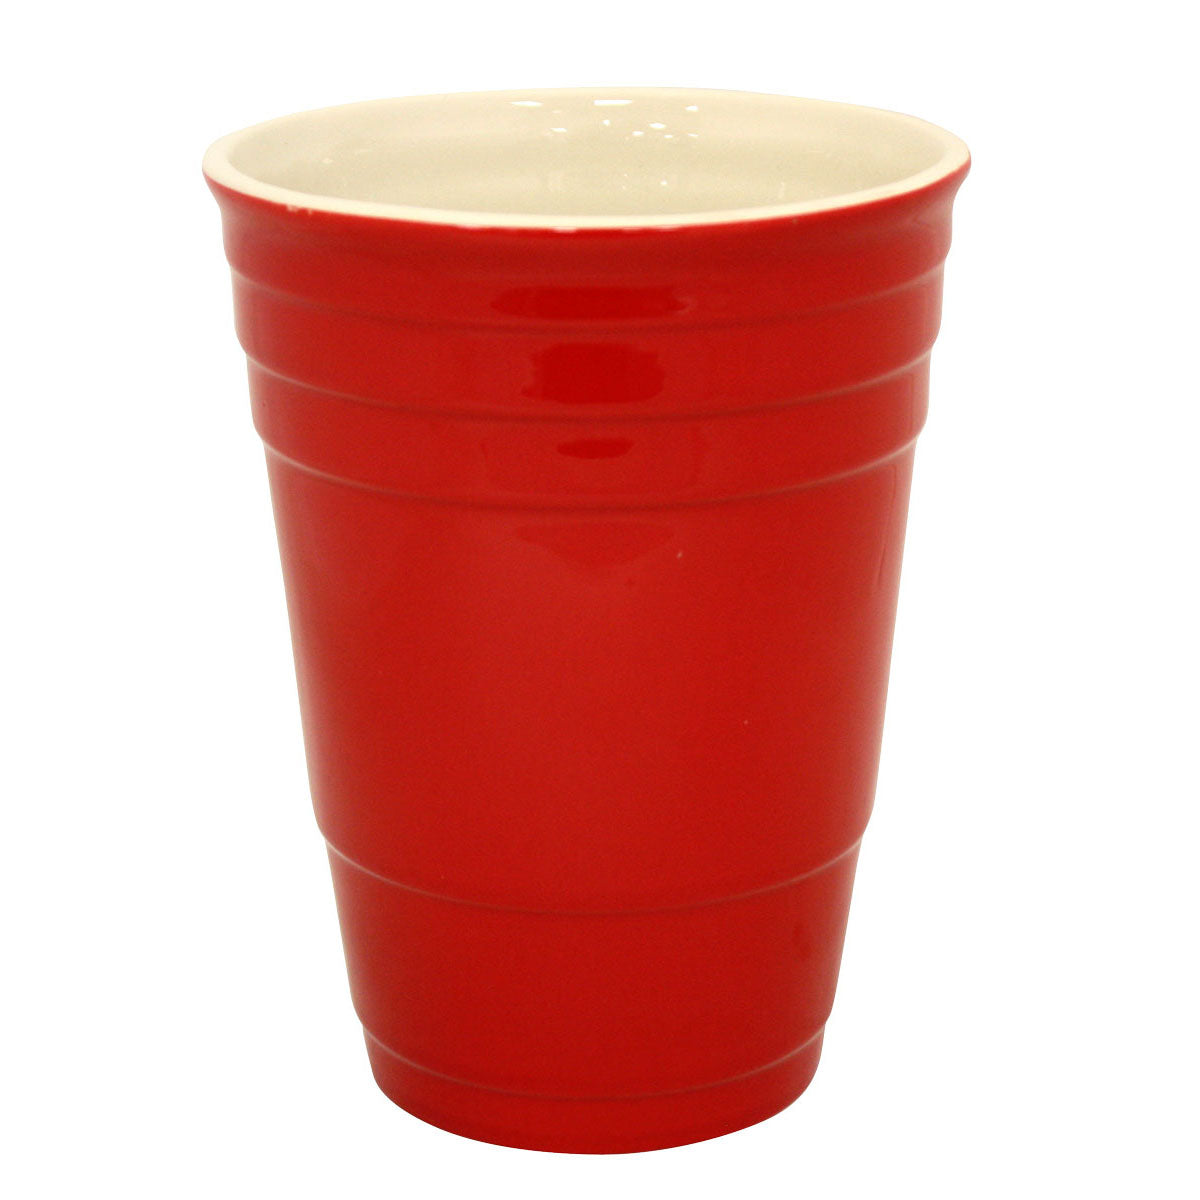 32 Oz. Ceramic red party Cup